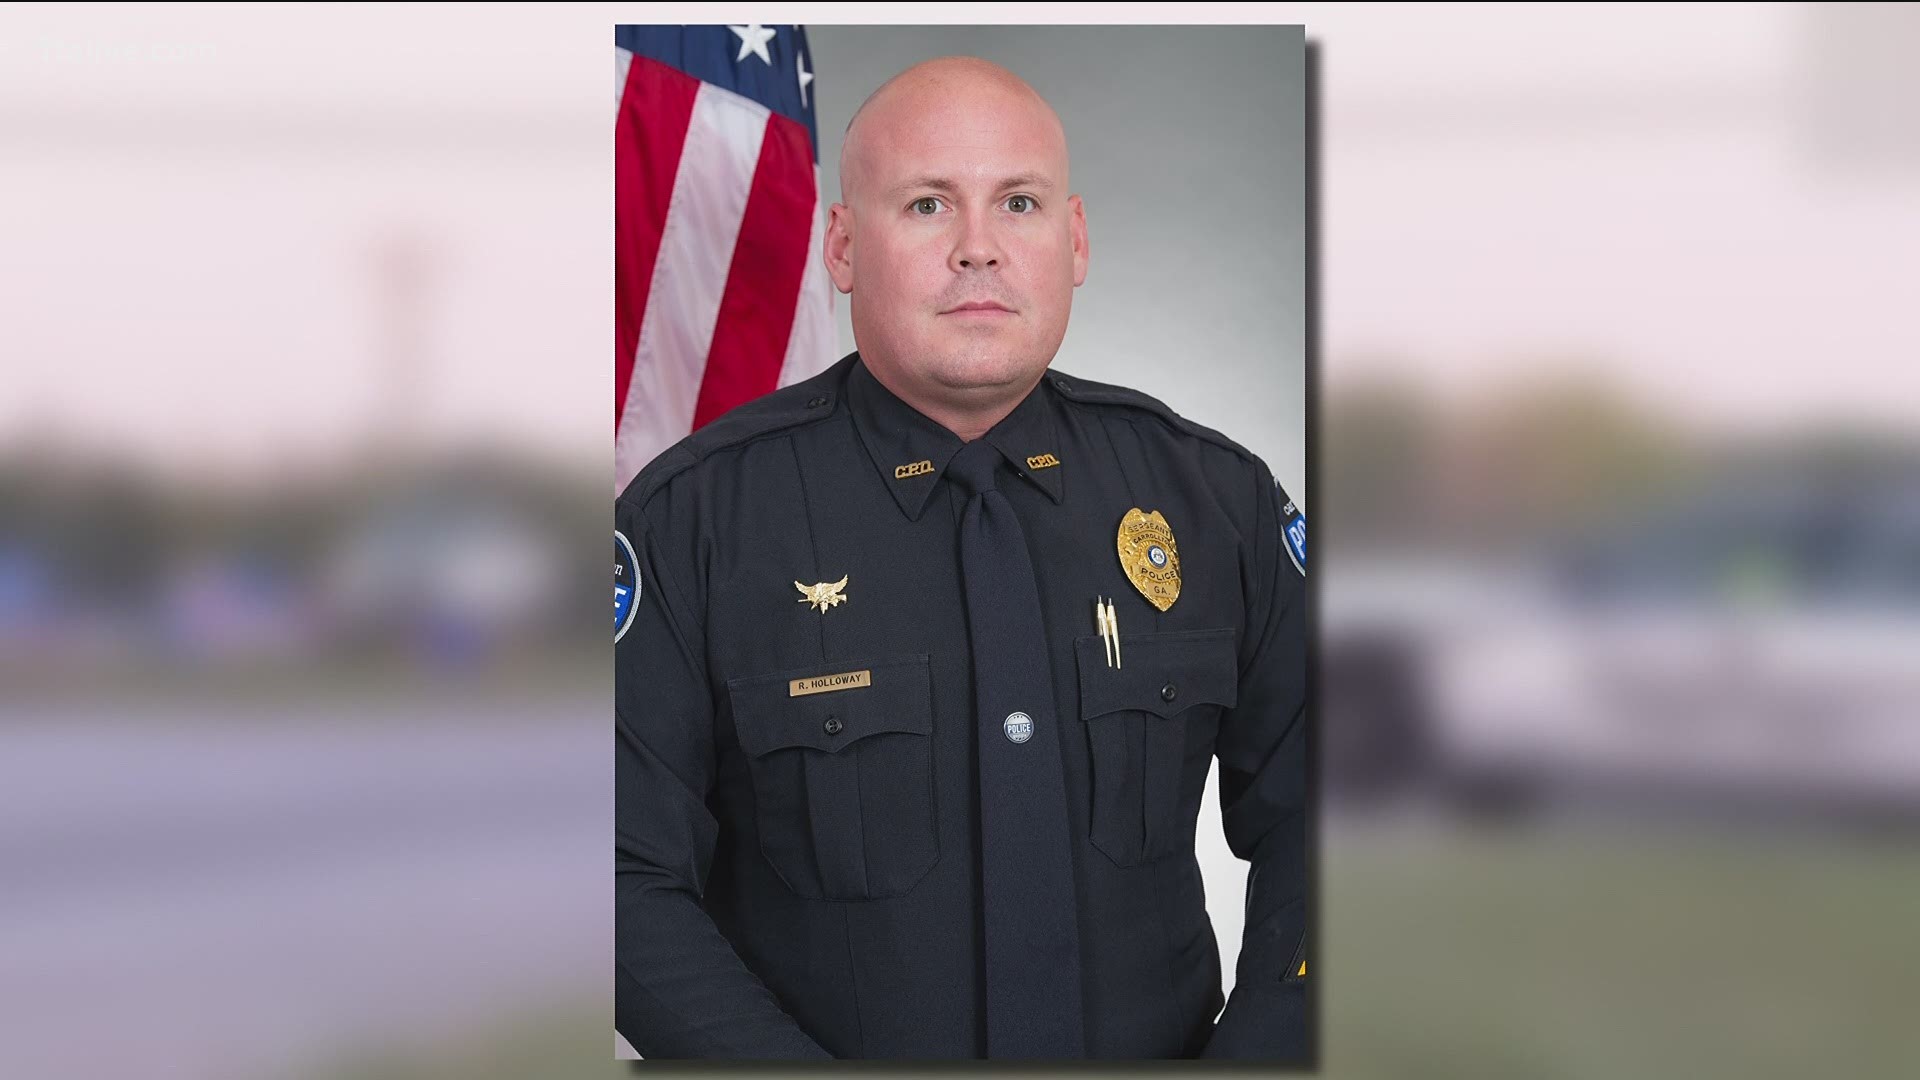 Sgt. Rob Holloway remains in critical condition, the Carrollton Police Department said. Two other law enforcement officers were released.